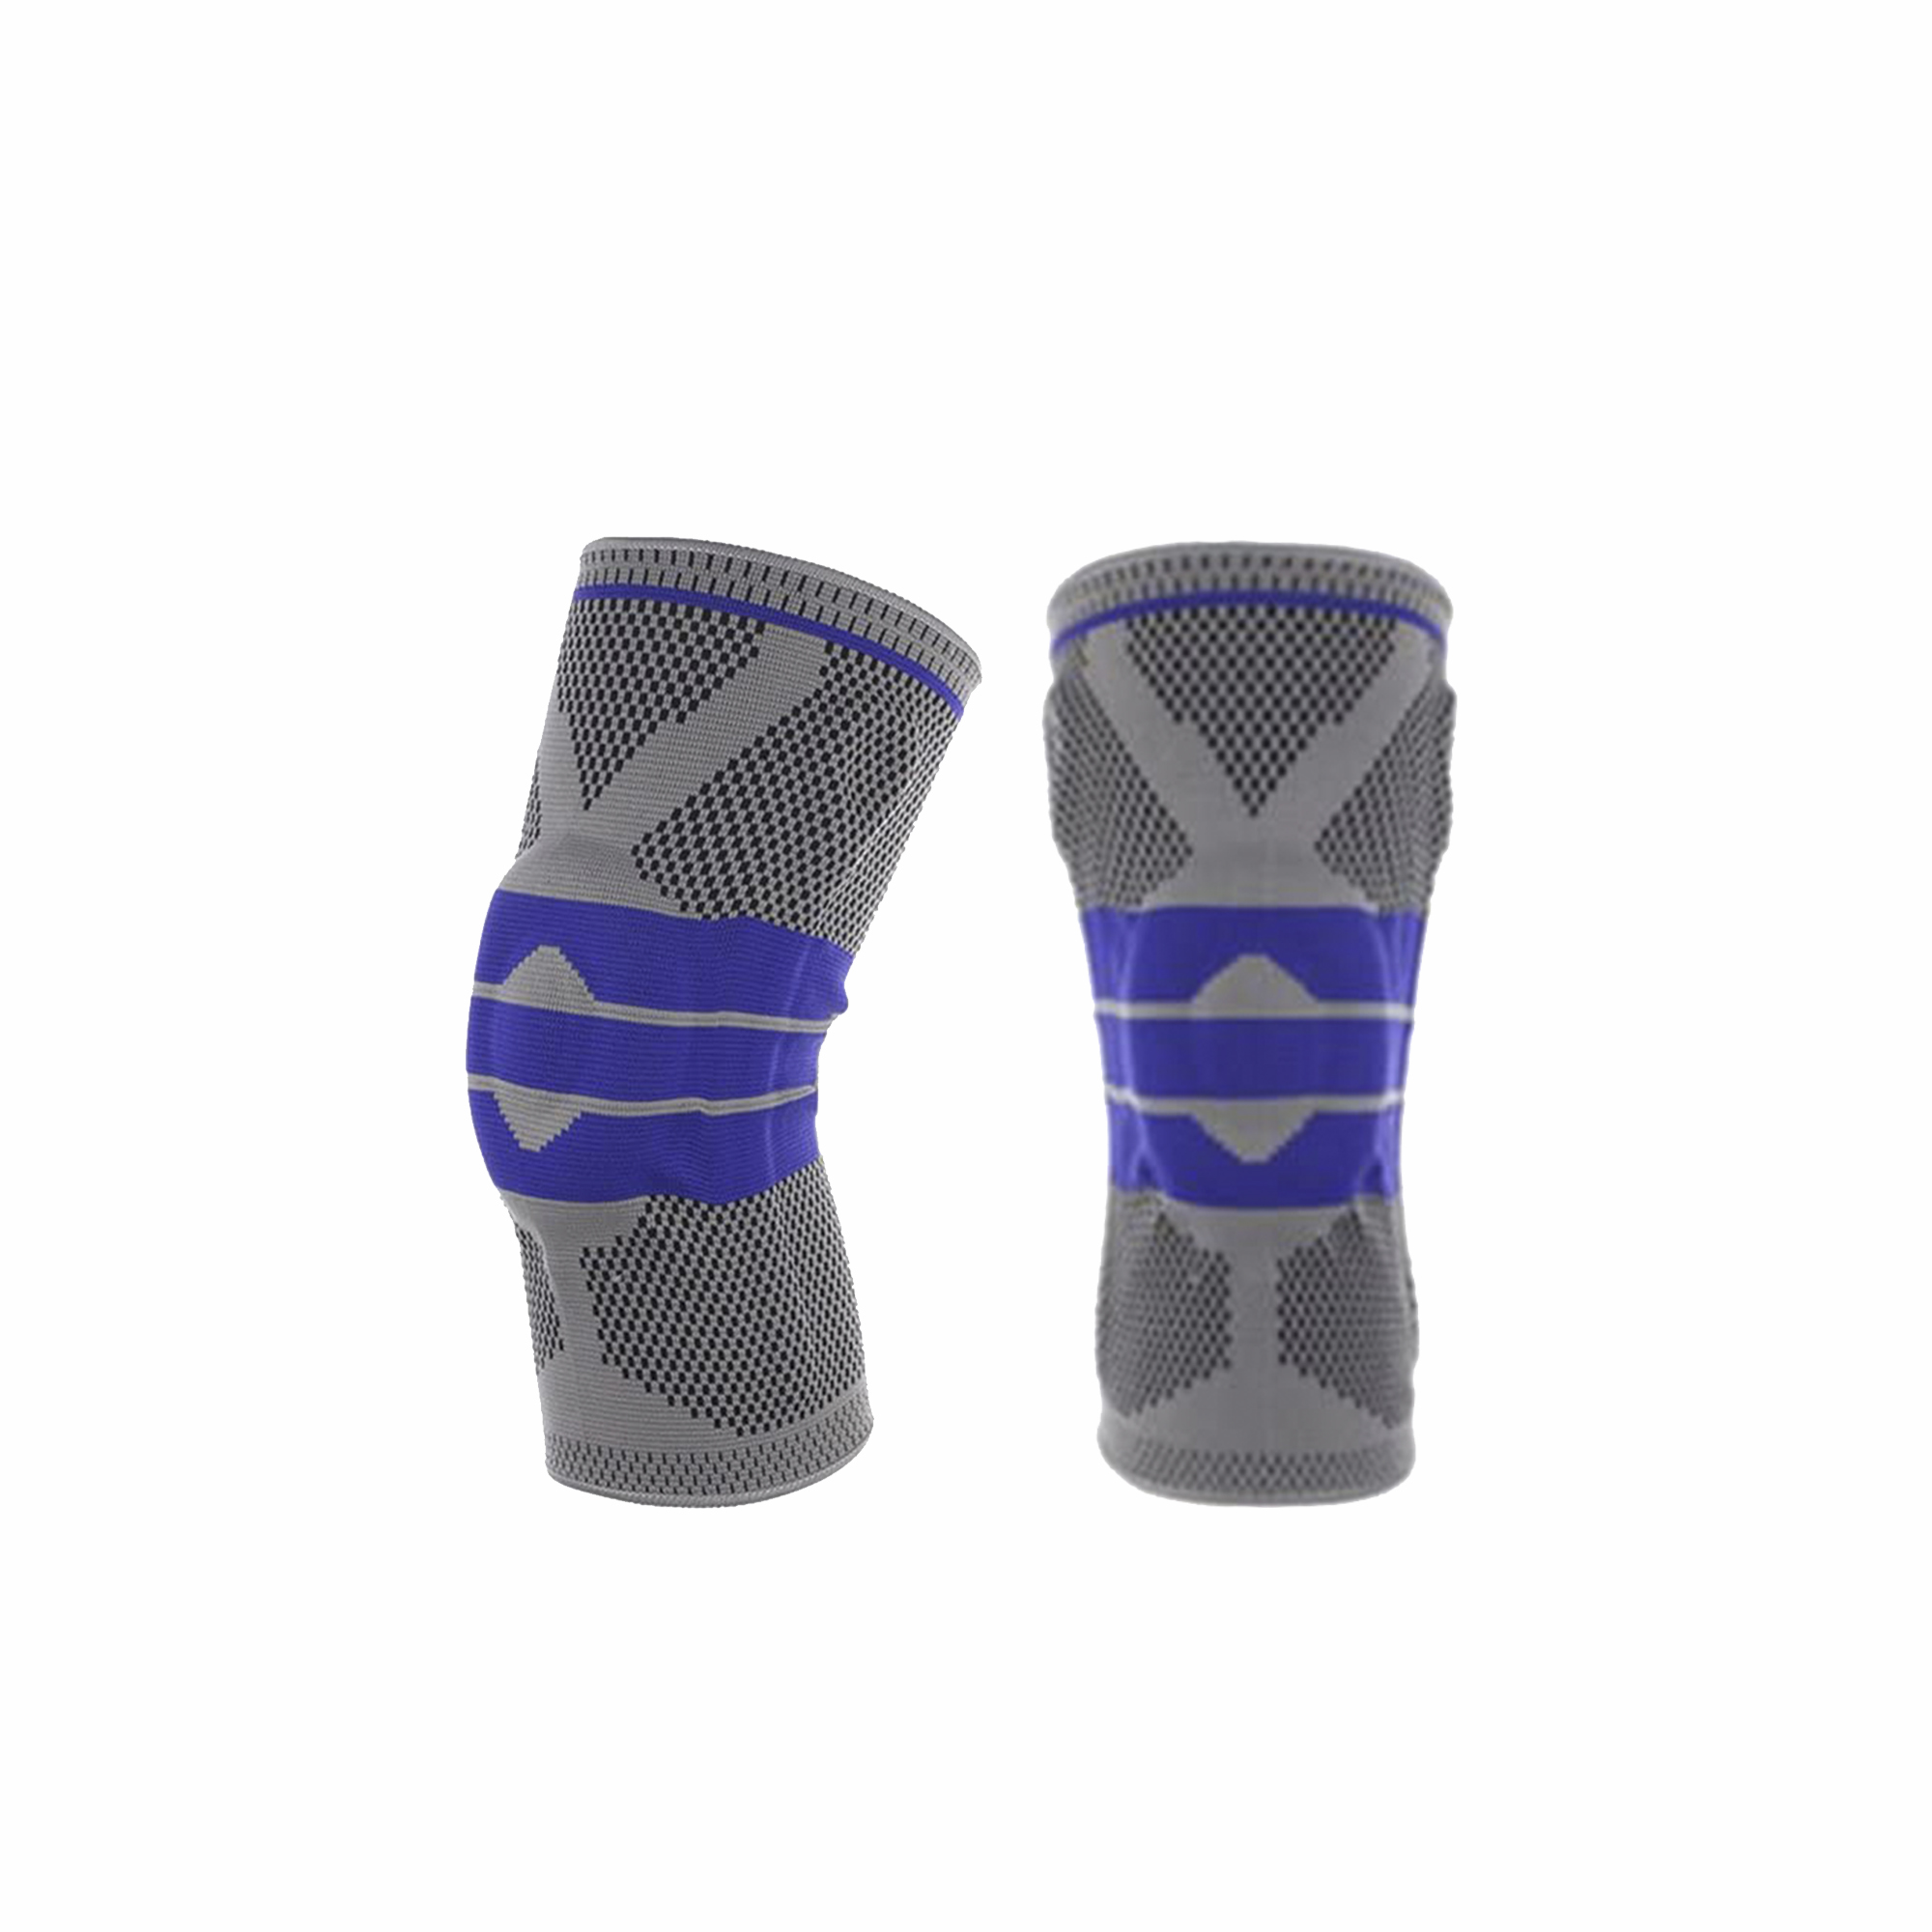 Silicone Spring Knee Pad 